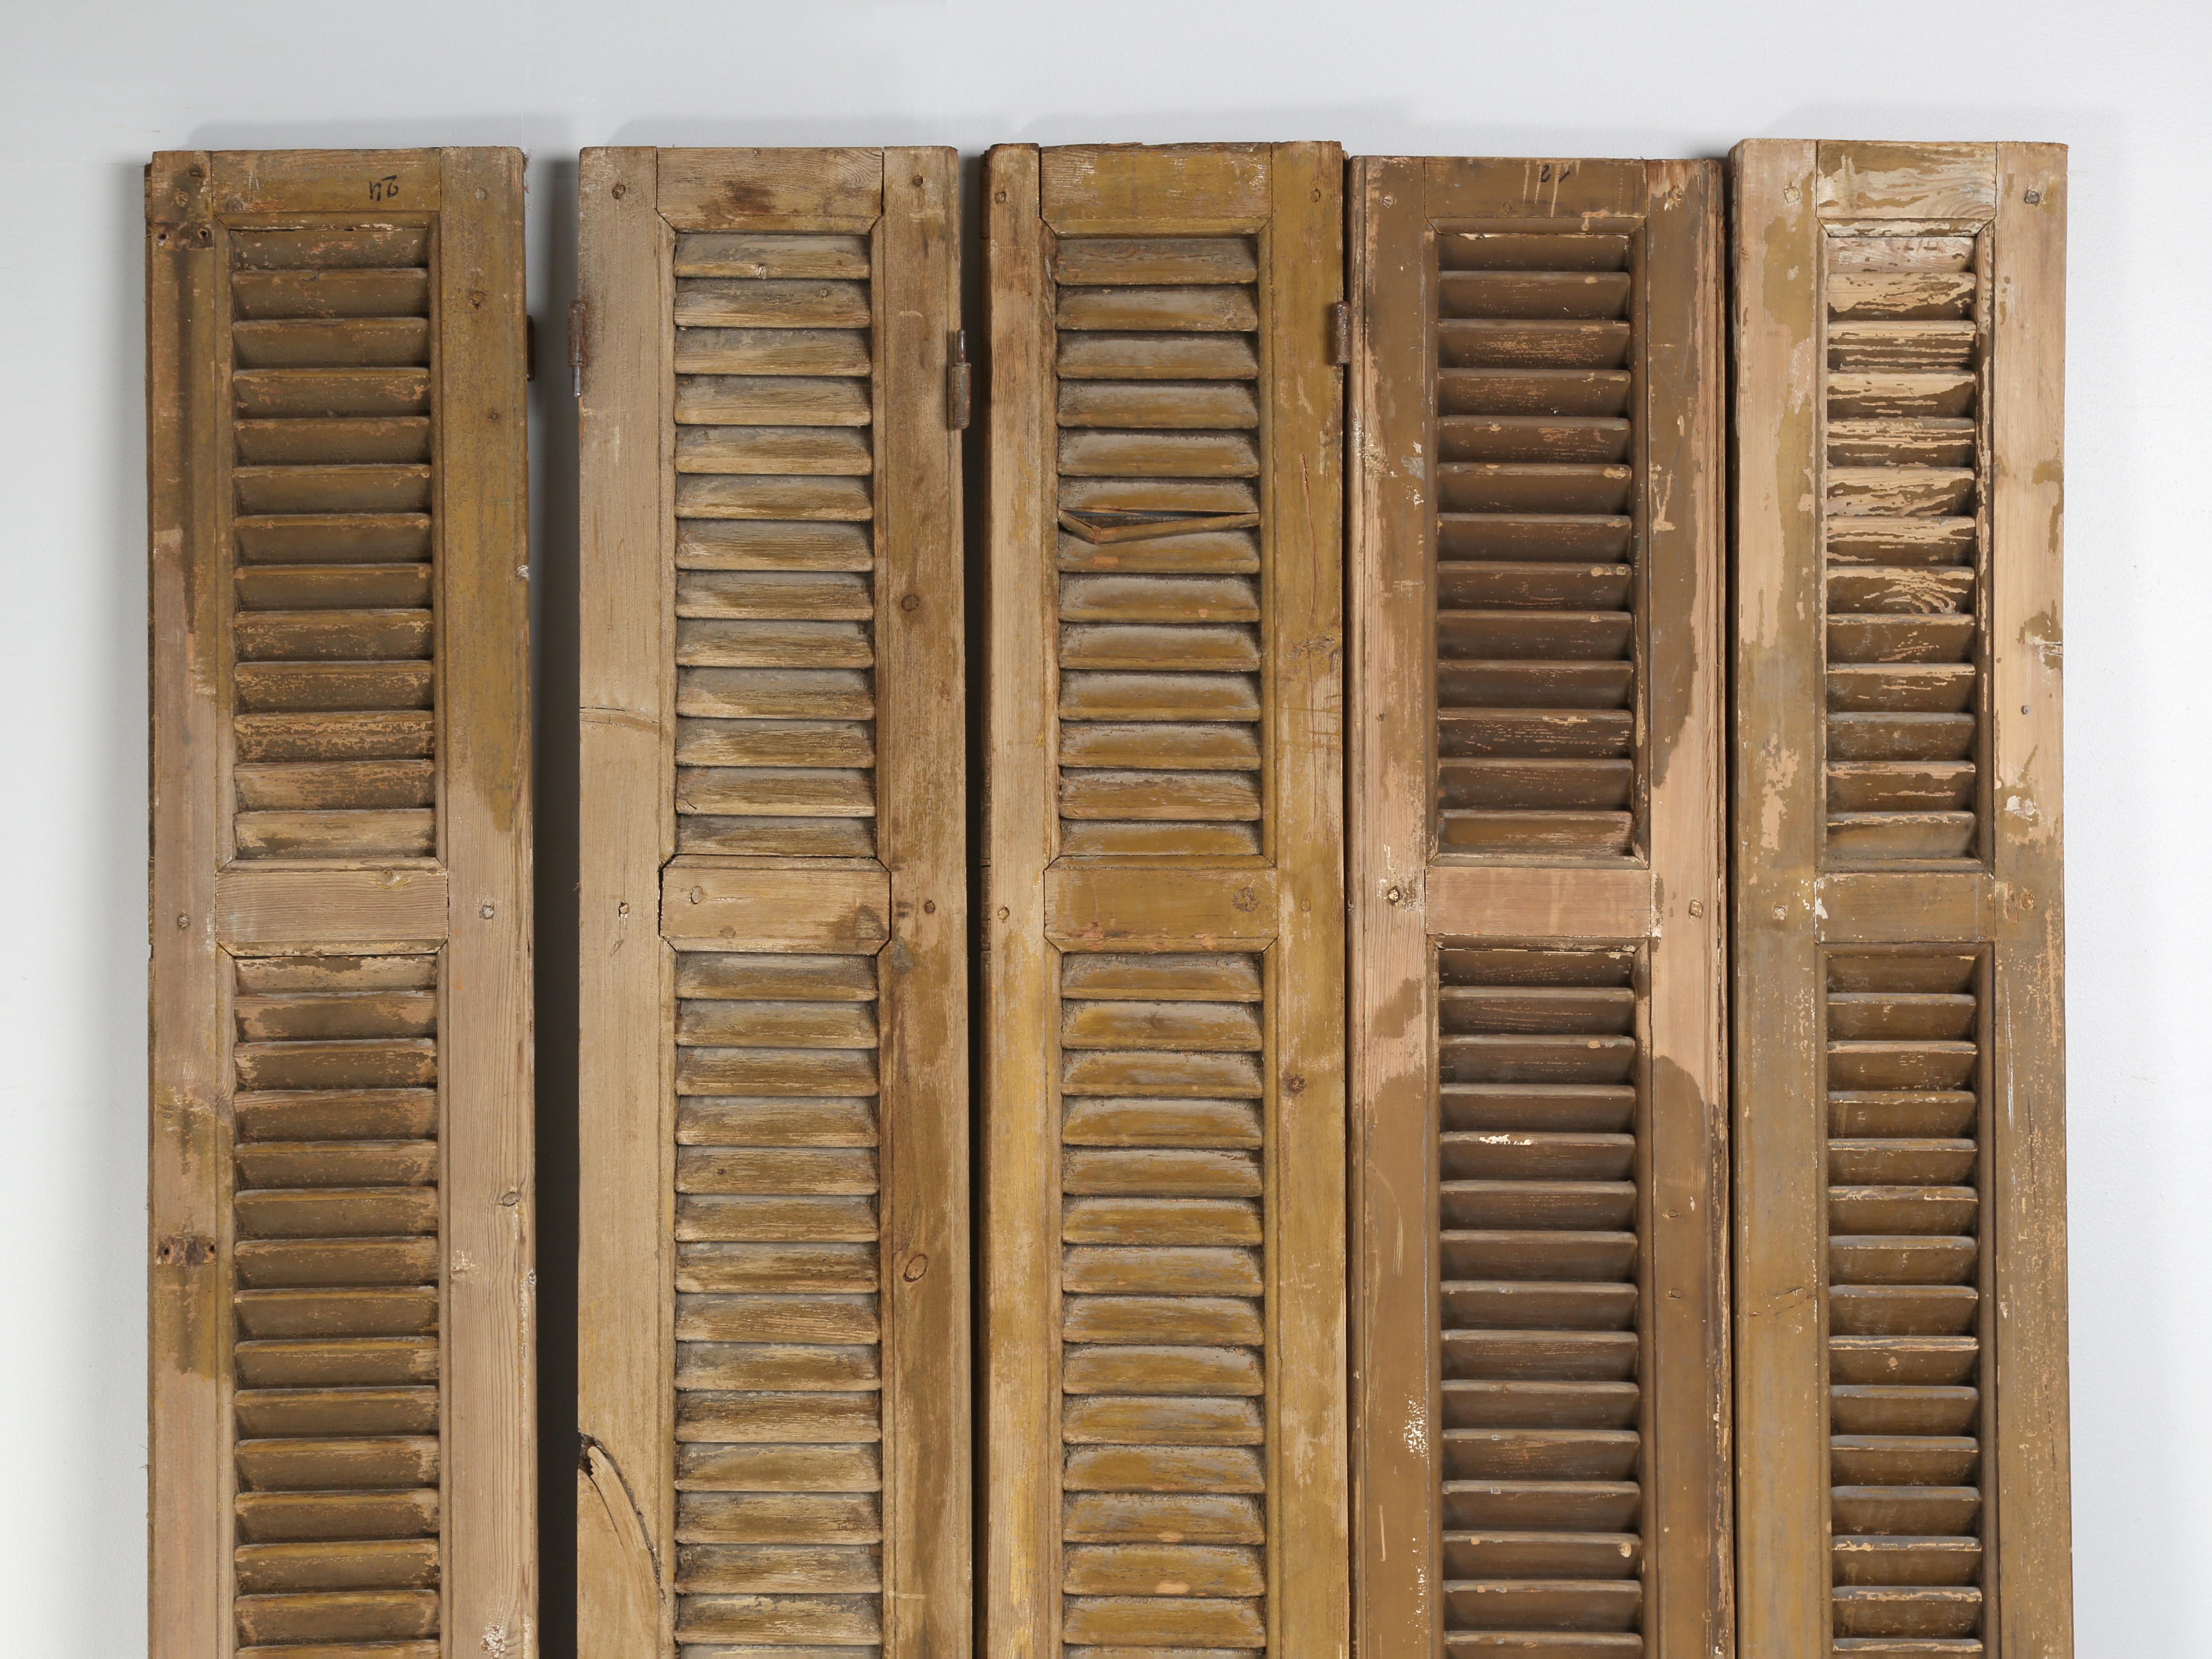 Set of (5) antique French shutters with a great patina. Ideal for creating a headboard or small screen.
We have a few dozen available and all are listed on 1stdibs, should you like to create a paneled wall?
**Please note damaged slat, image 4. The